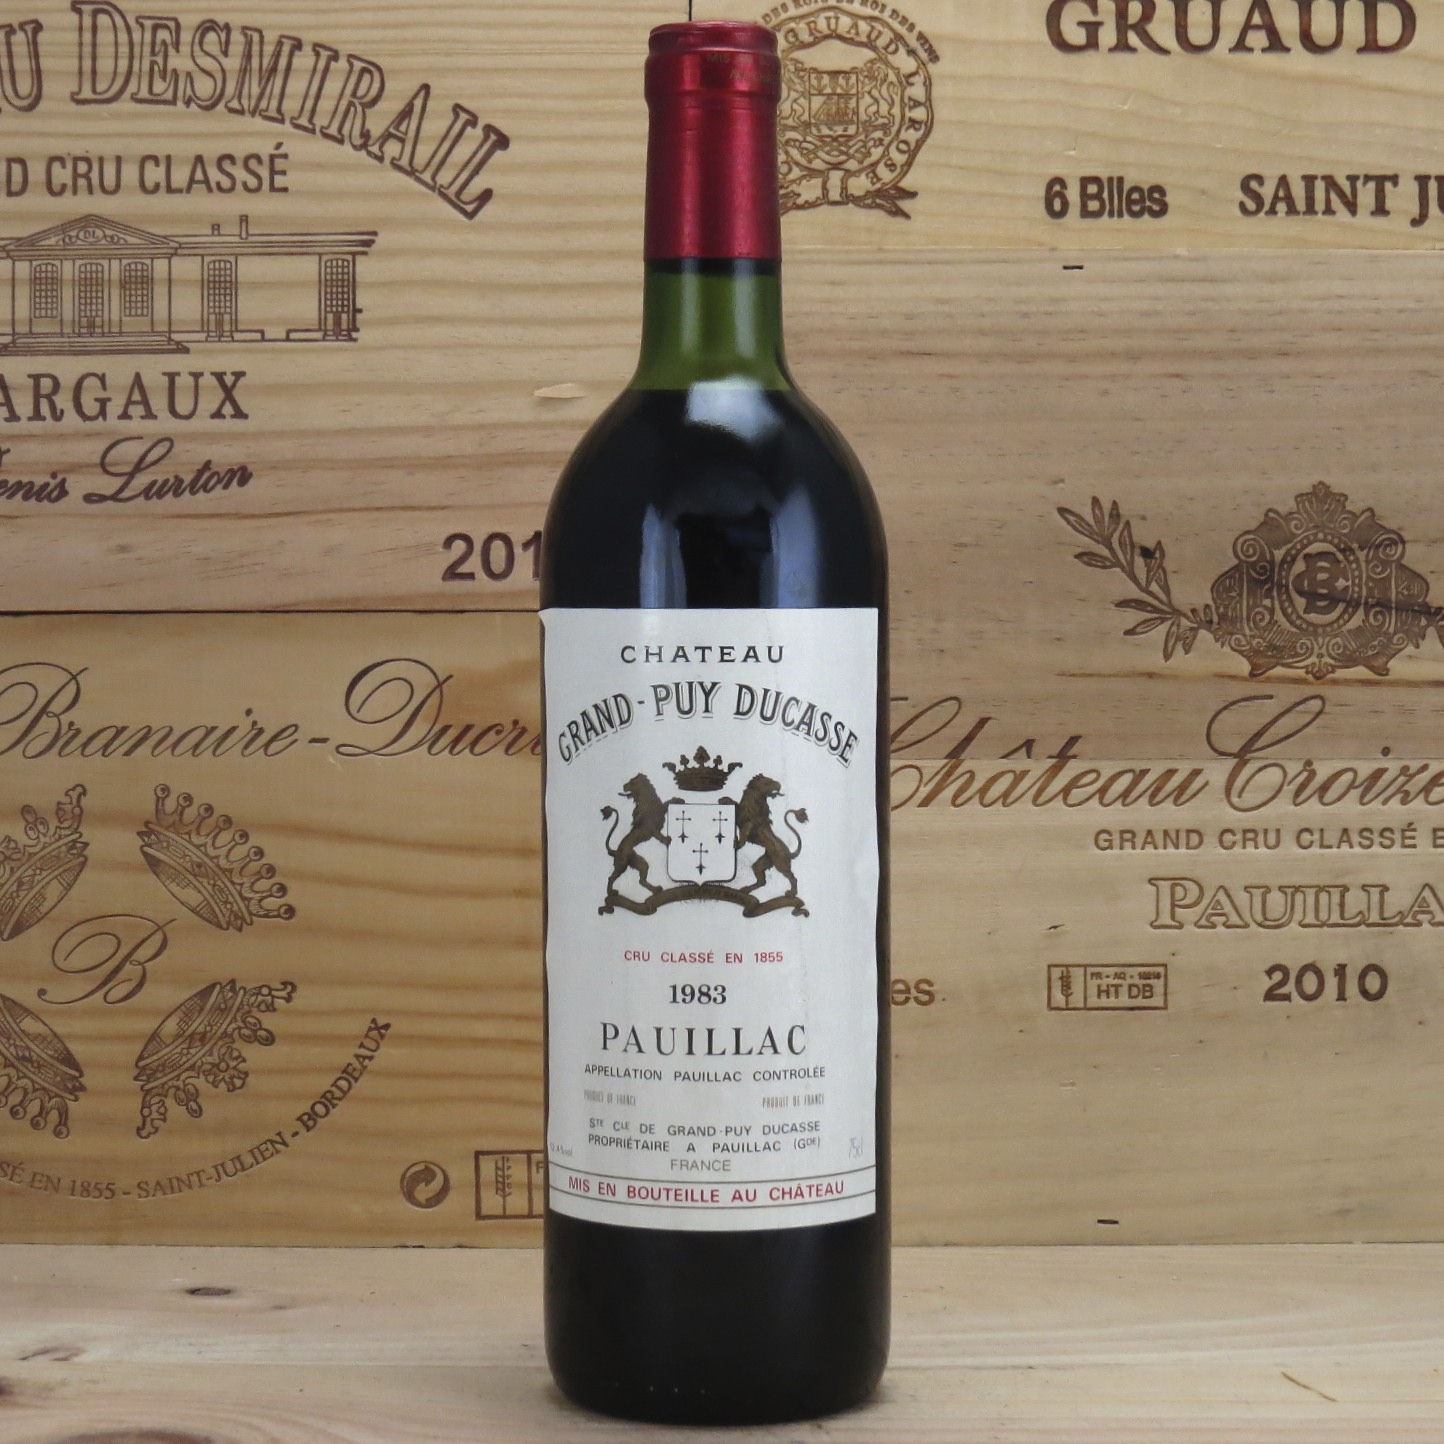 1983 Chateau Grand Puy Ducasse